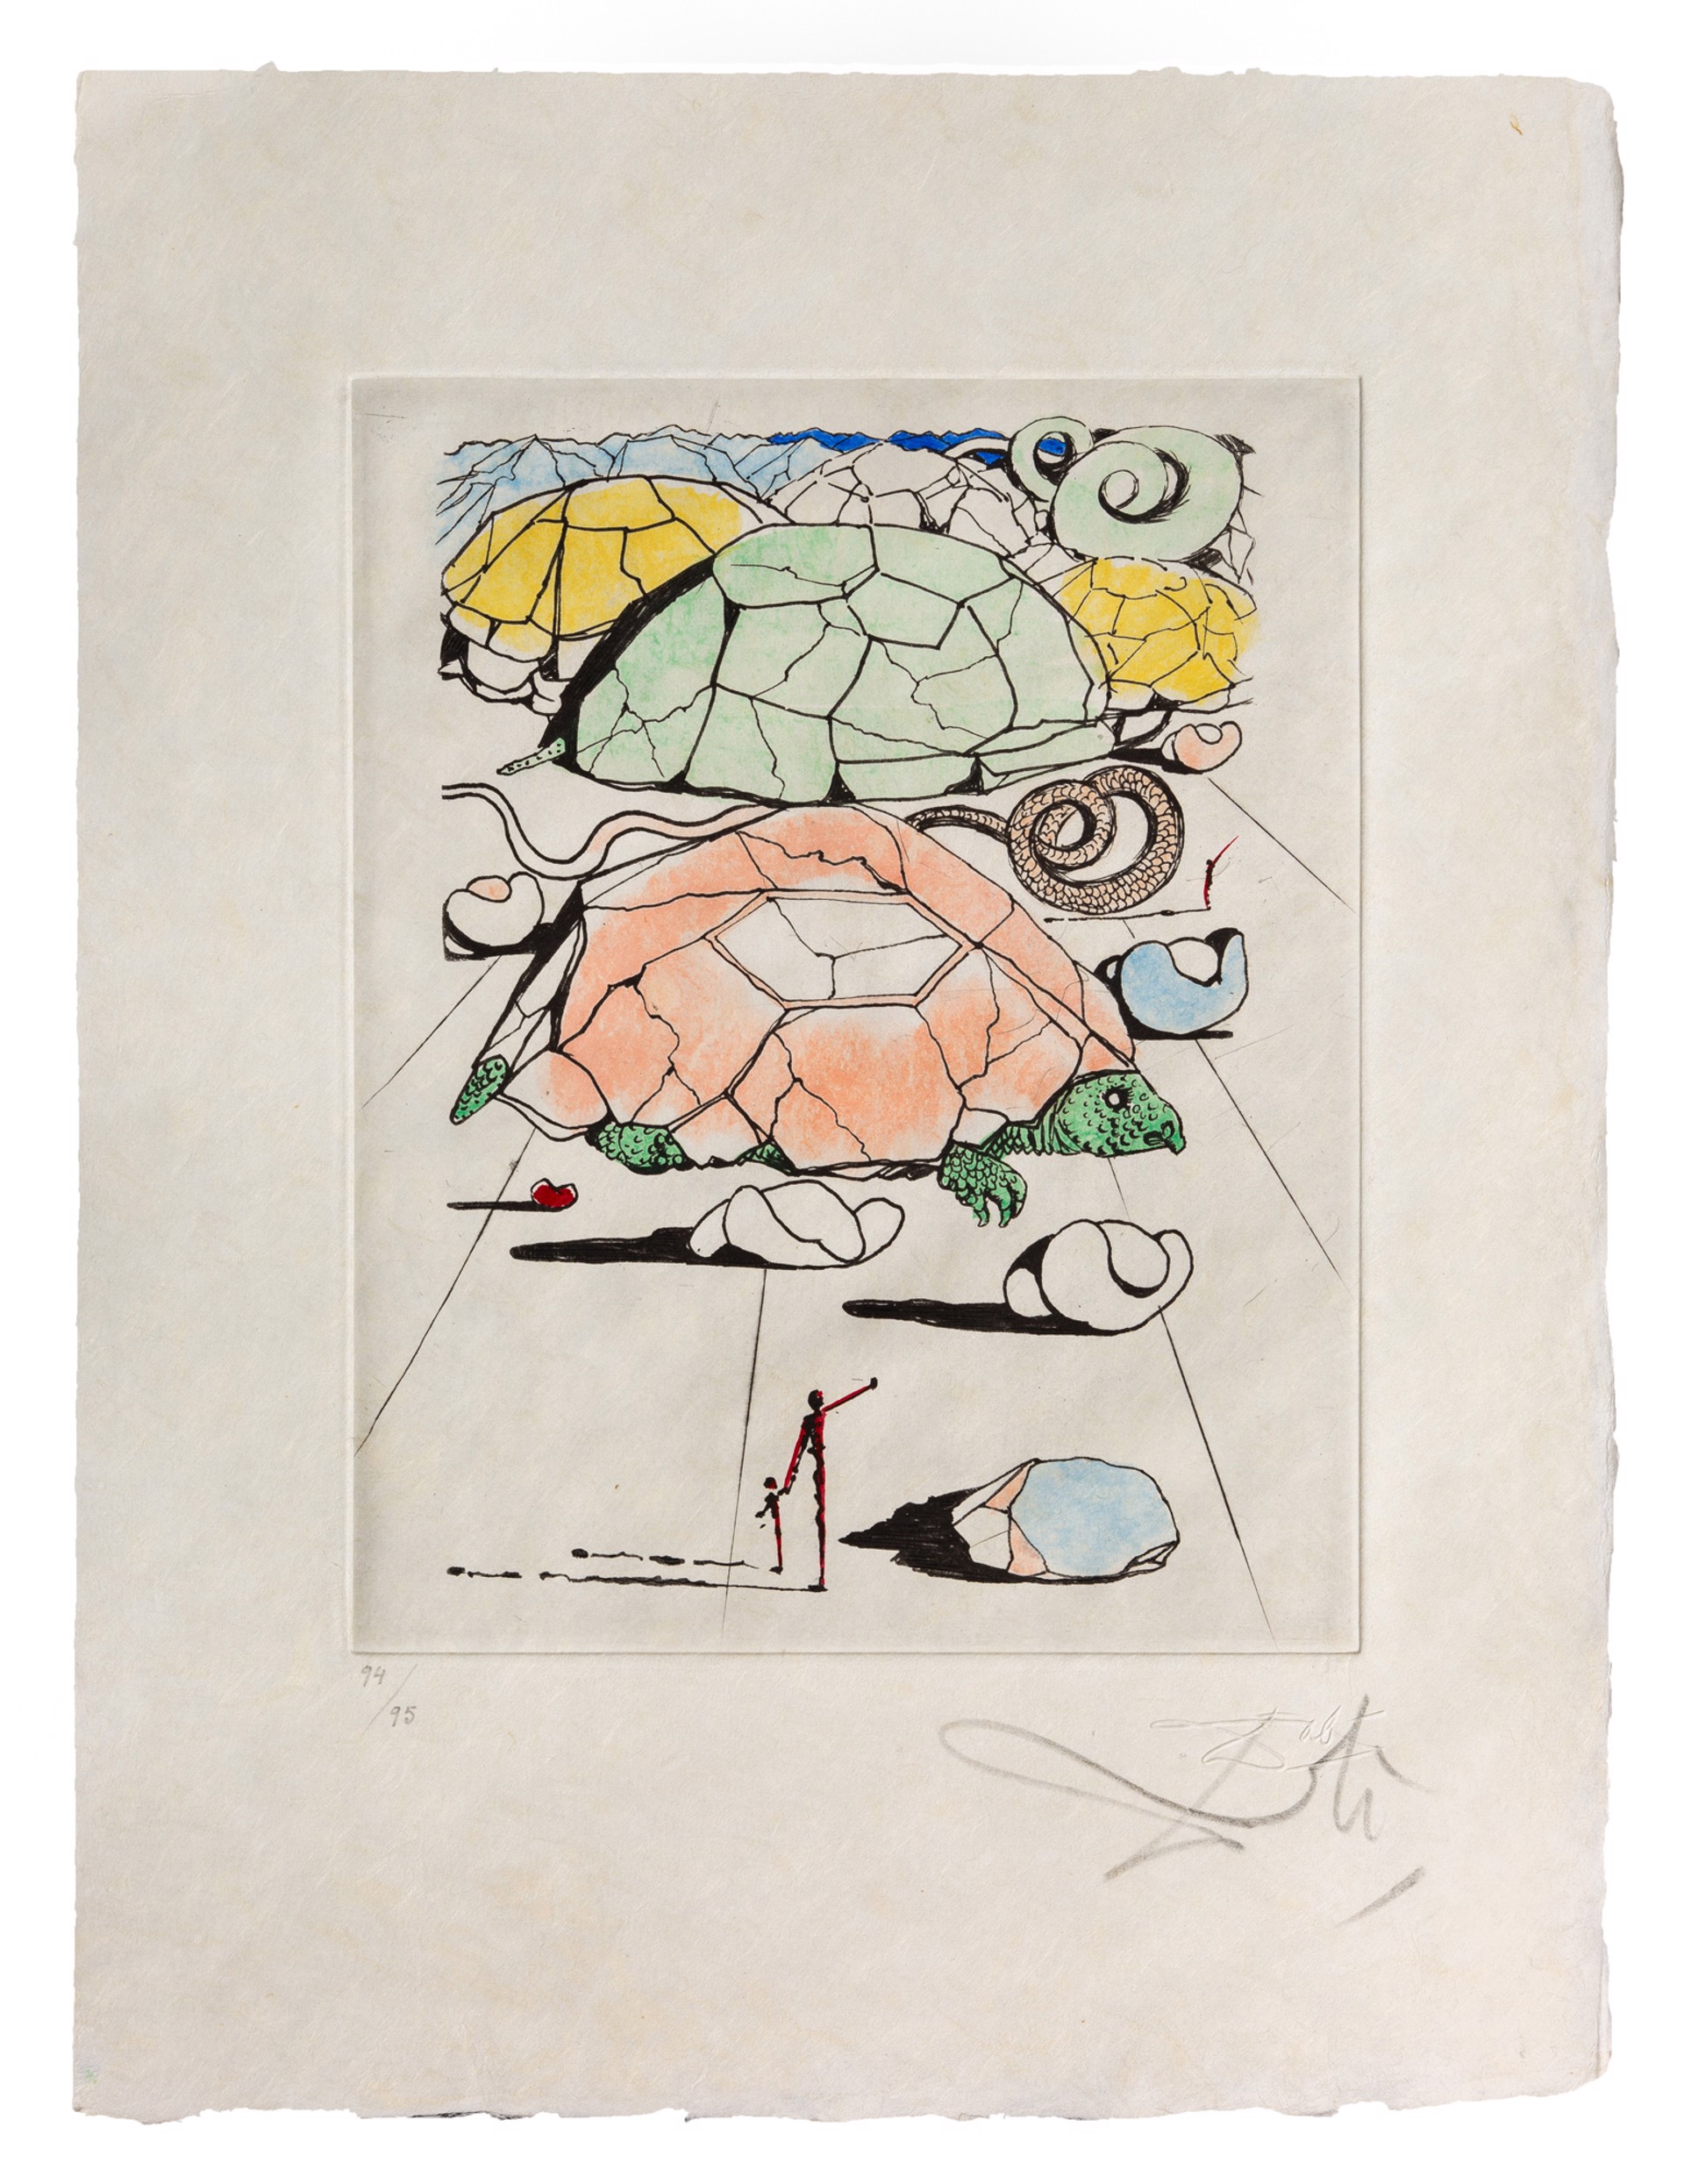 Mao Zedong "The Turtle Mountain" by Salvador Dalí